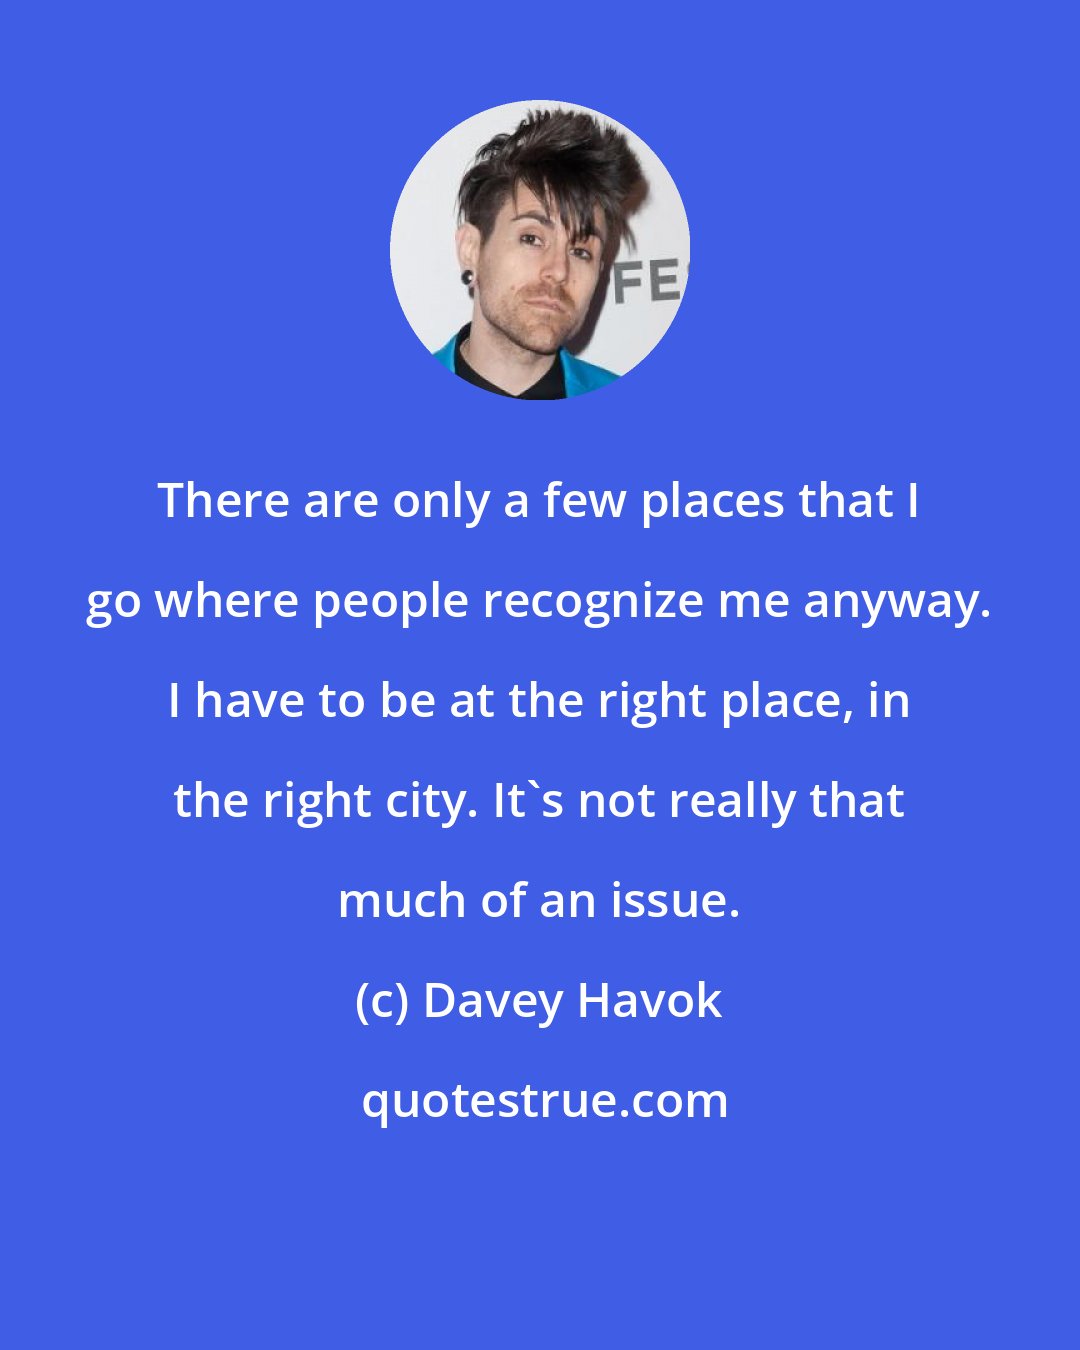 Davey Havok: There are only a few places that I go where people recognize me anyway. I have to be at the right place, in the right city. It's not really that much of an issue.